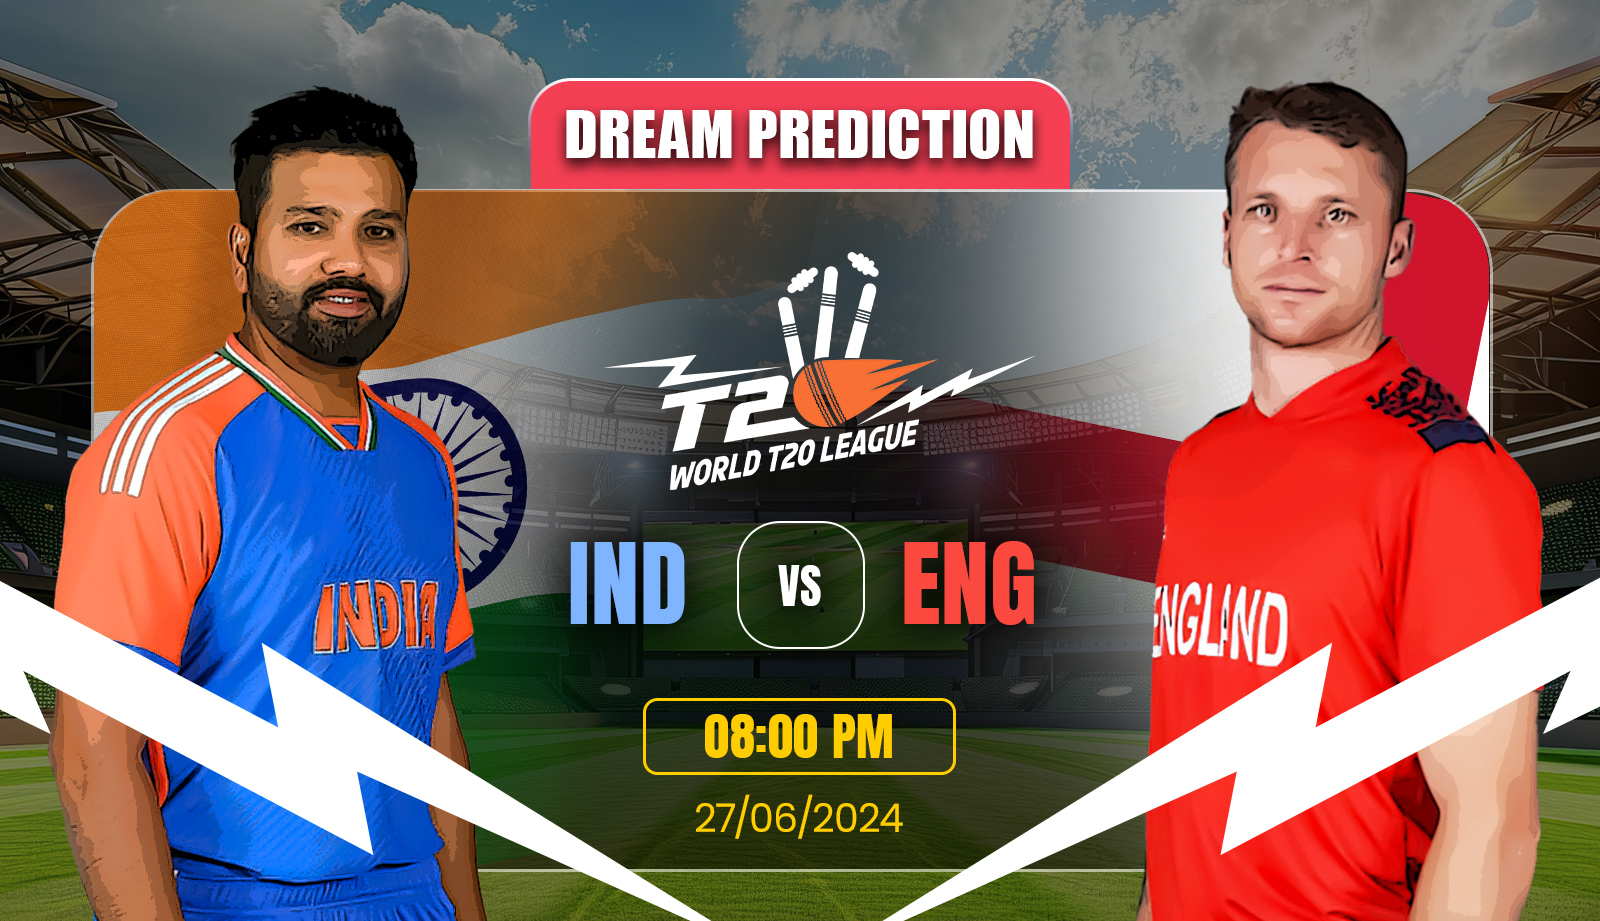 IND-IND-vs-ENG-dream11-prediction-t20-wc-fantasy-cricket-tips-playing-xi-pitch-report-injury-updates-for-match-54-of-t20-world-cup-2024